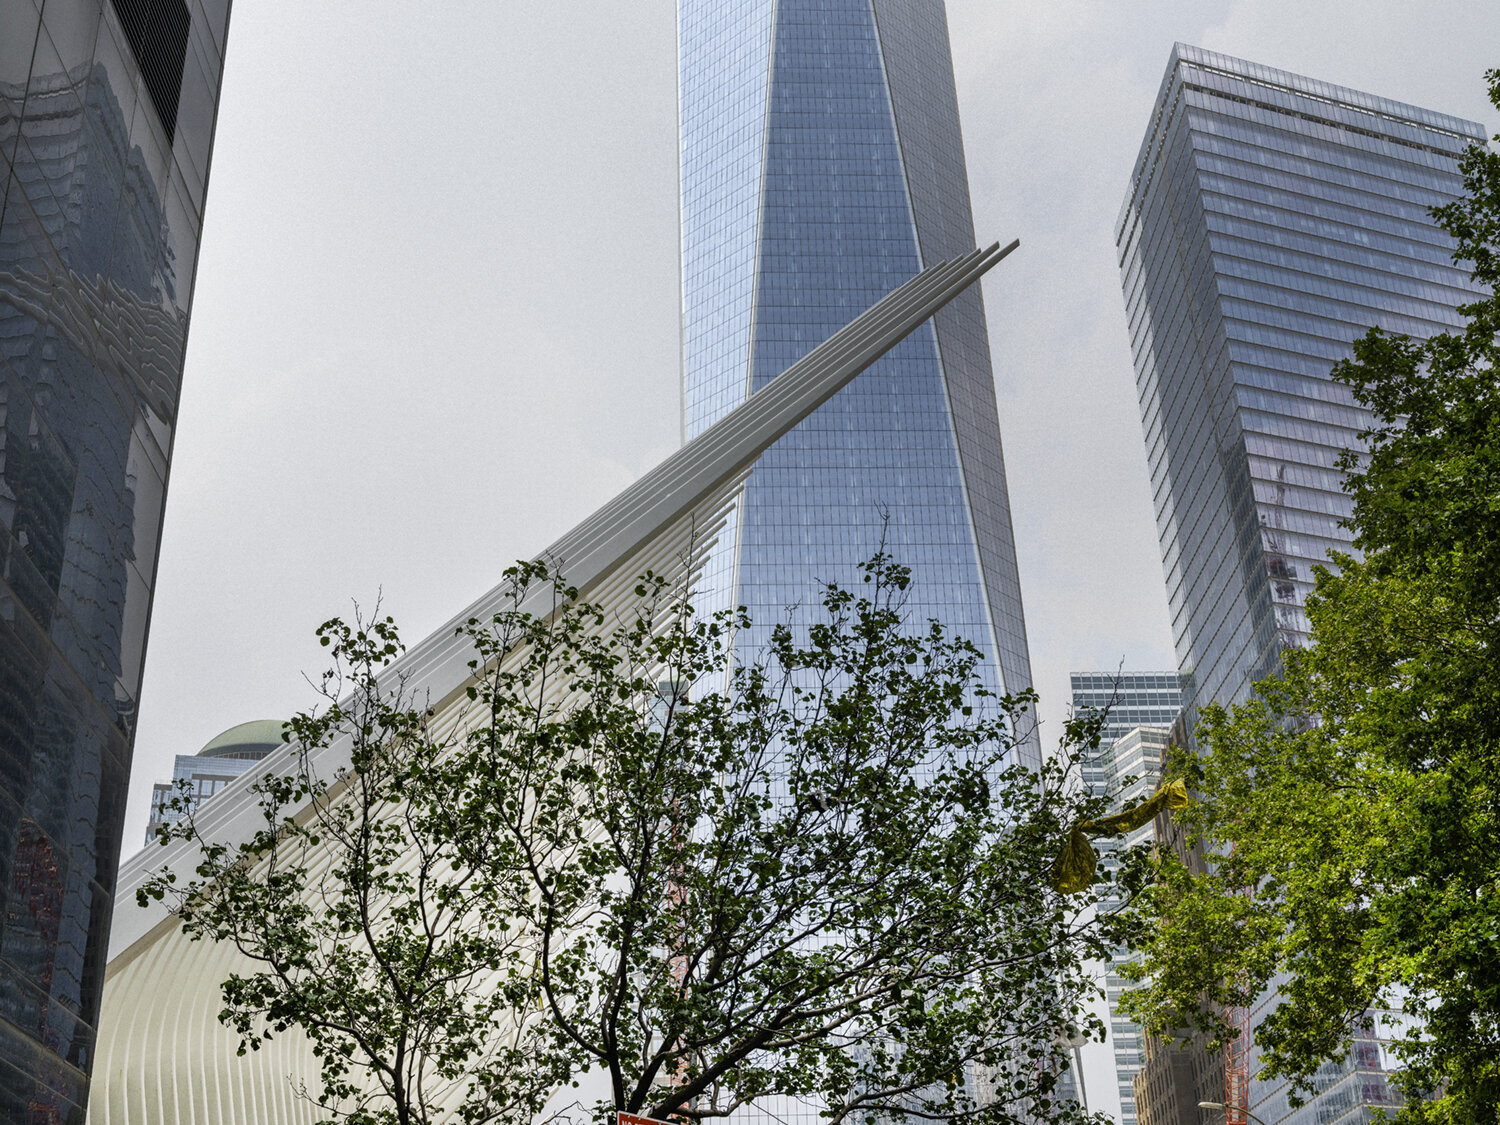 One World Trade Center (Libeskind, Childs, Gottesdiener) and the Oculus (Calatrava), NYC. 